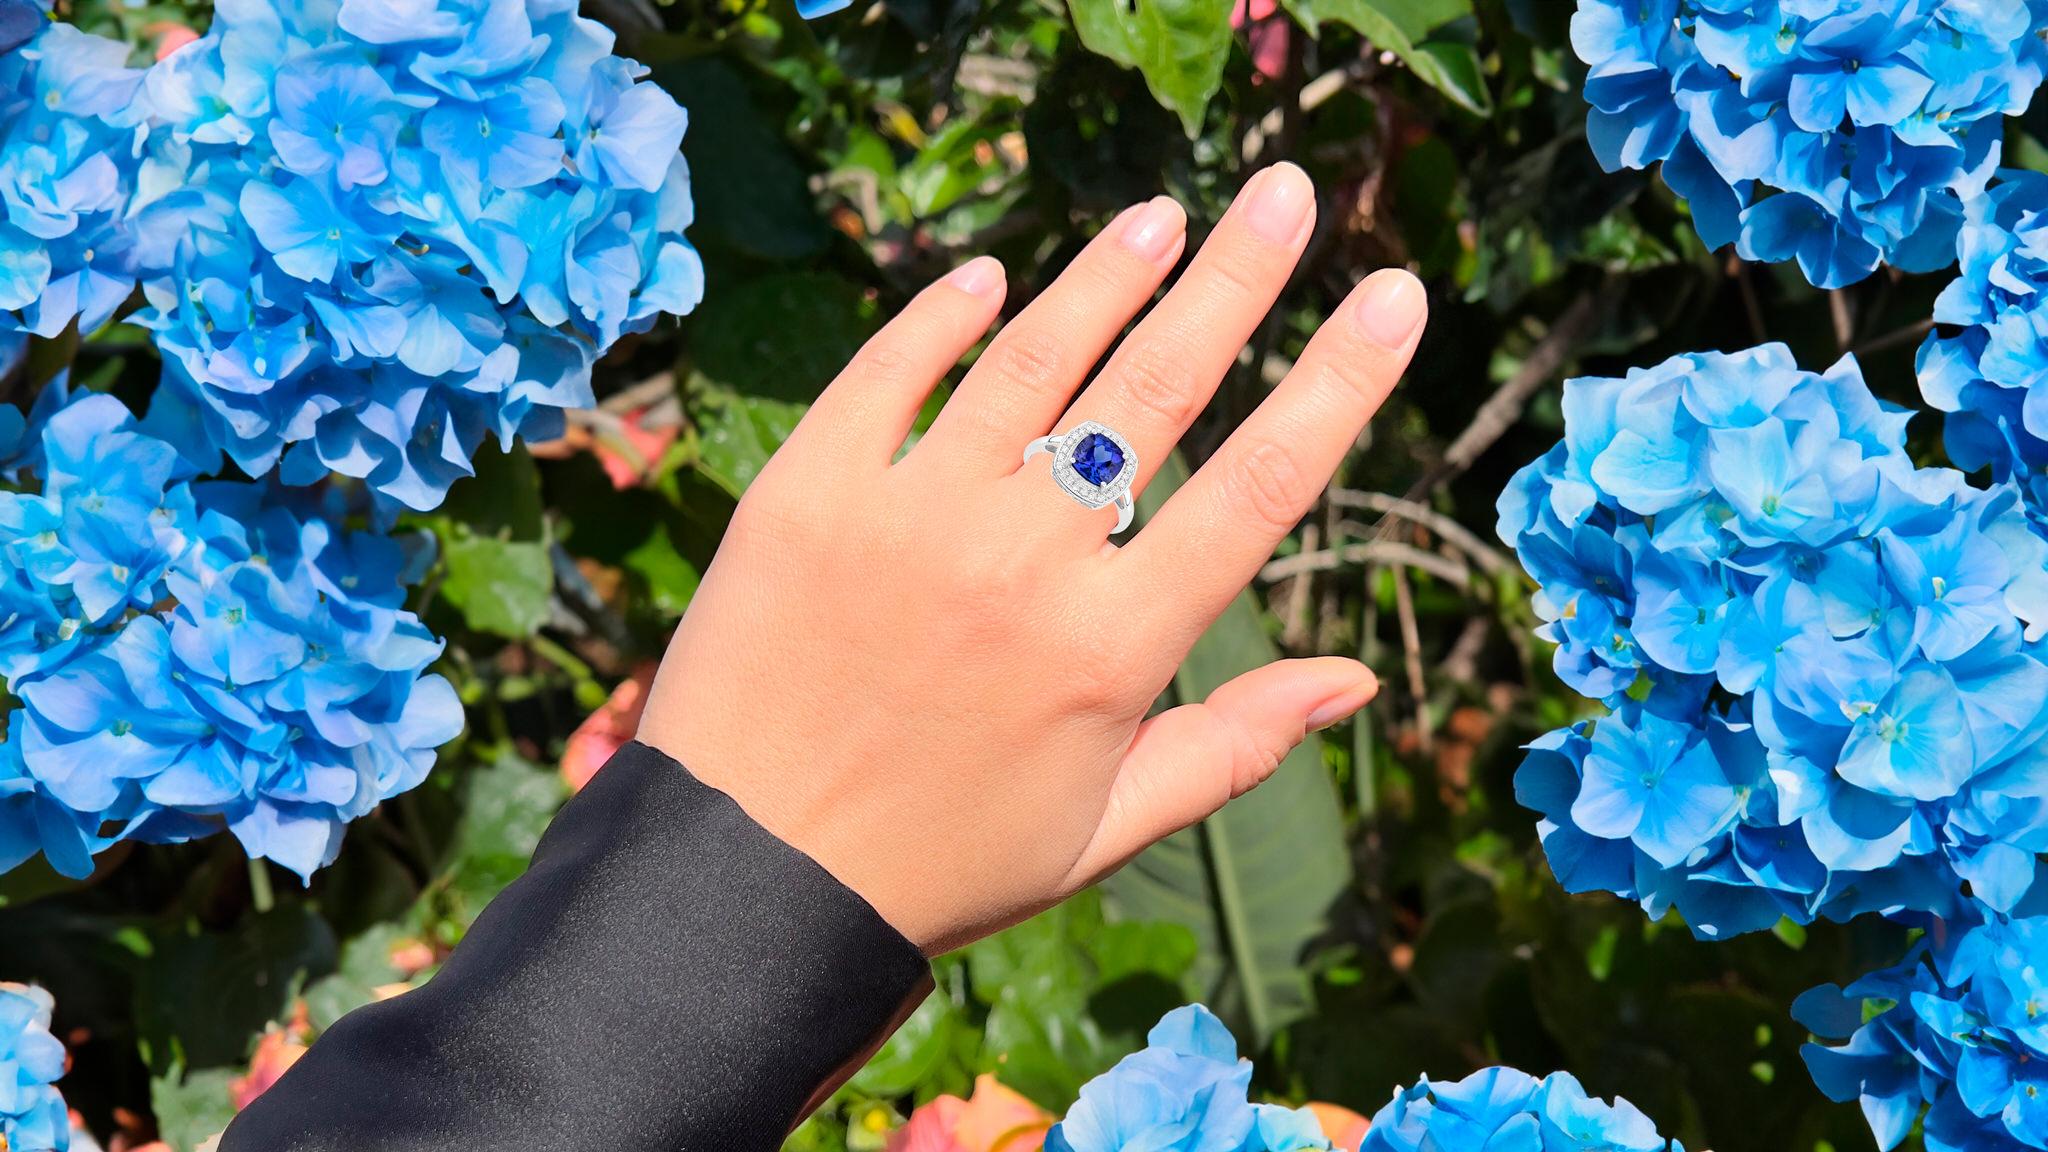 It comes with the Gemological Appraisal by GIA GG/AJP
All Gemstones are Natural
Cushion Tanzanite = 2.02 Carat
24 Round Diamonds = 0.24 Carats
Metal: 14K White Gold
Ring Size: 7* US
*It can be resized complimentary
